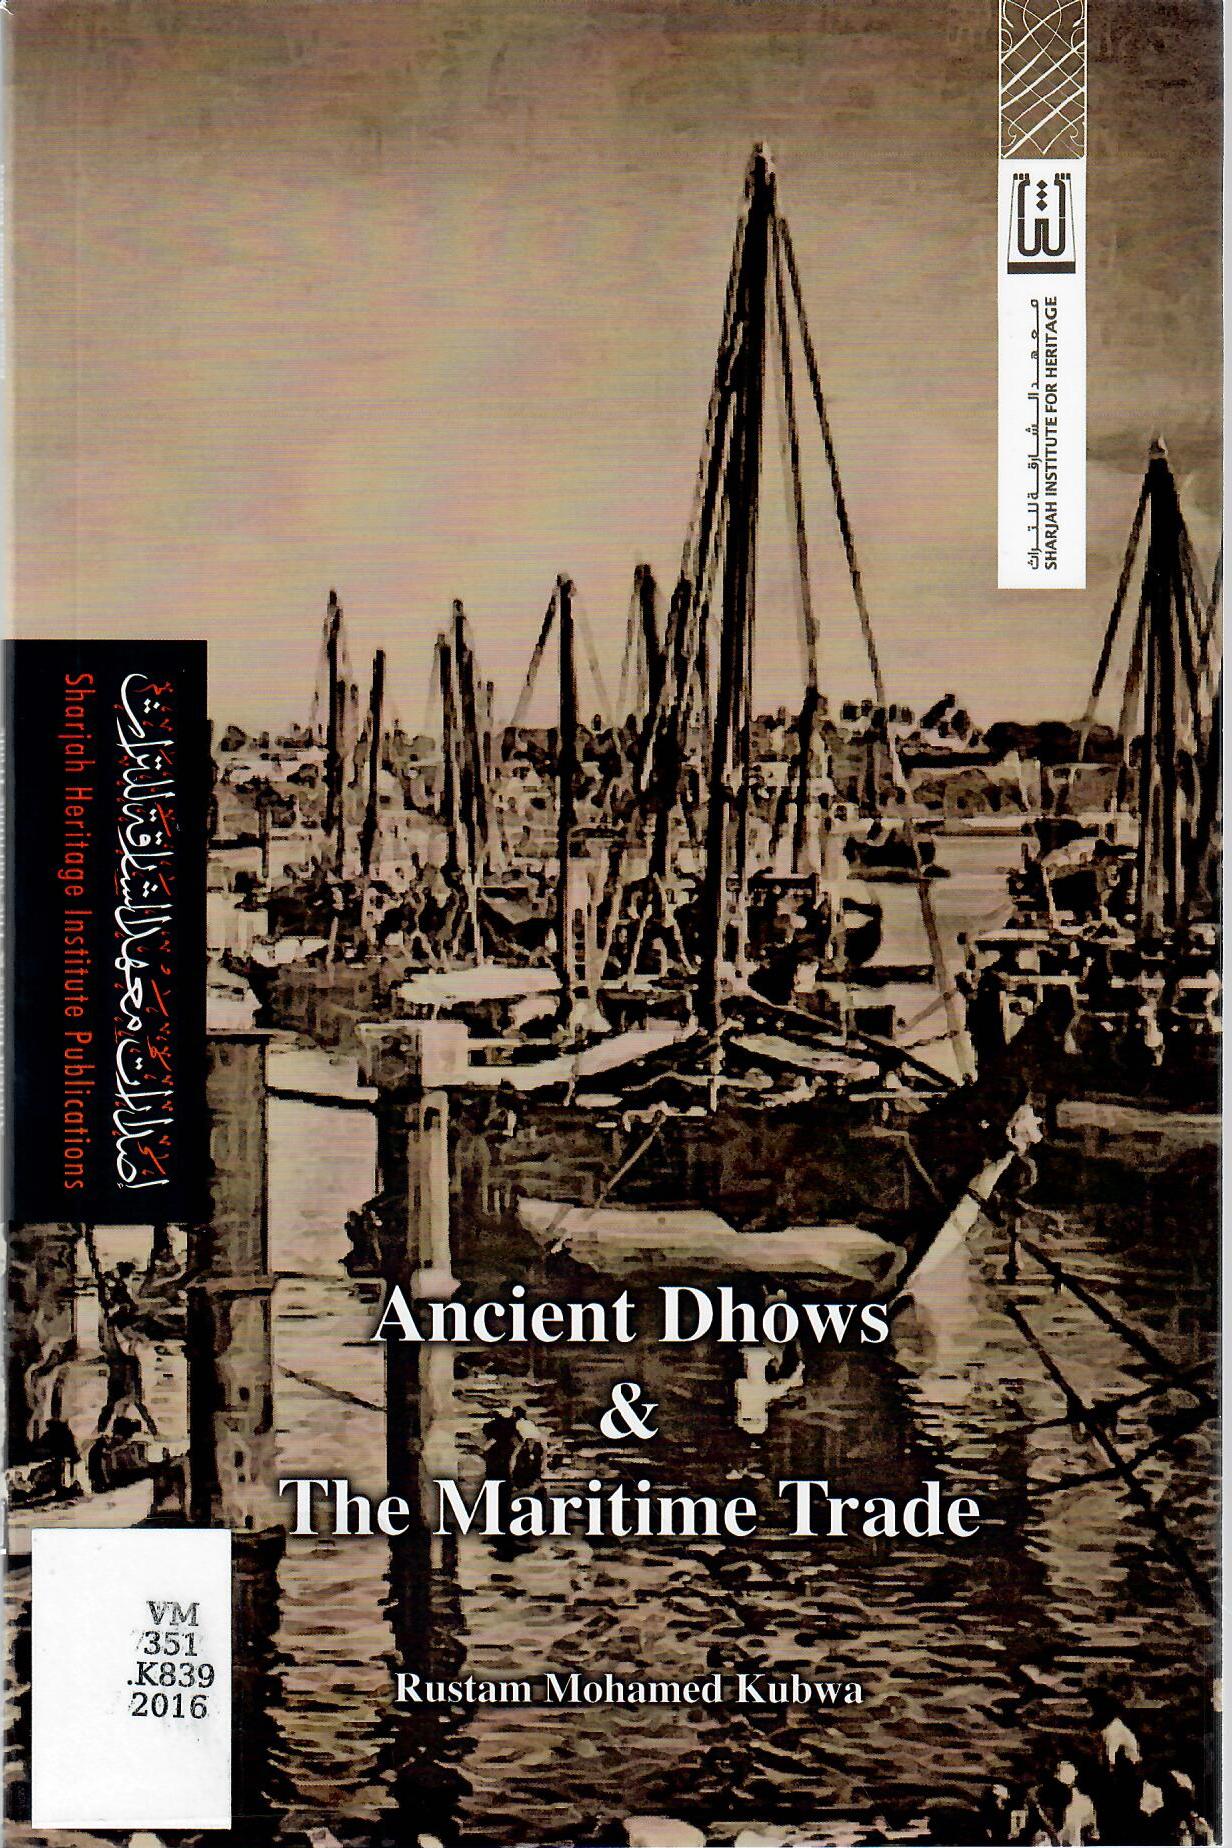 Ancient Dhows and The Maritime Trade